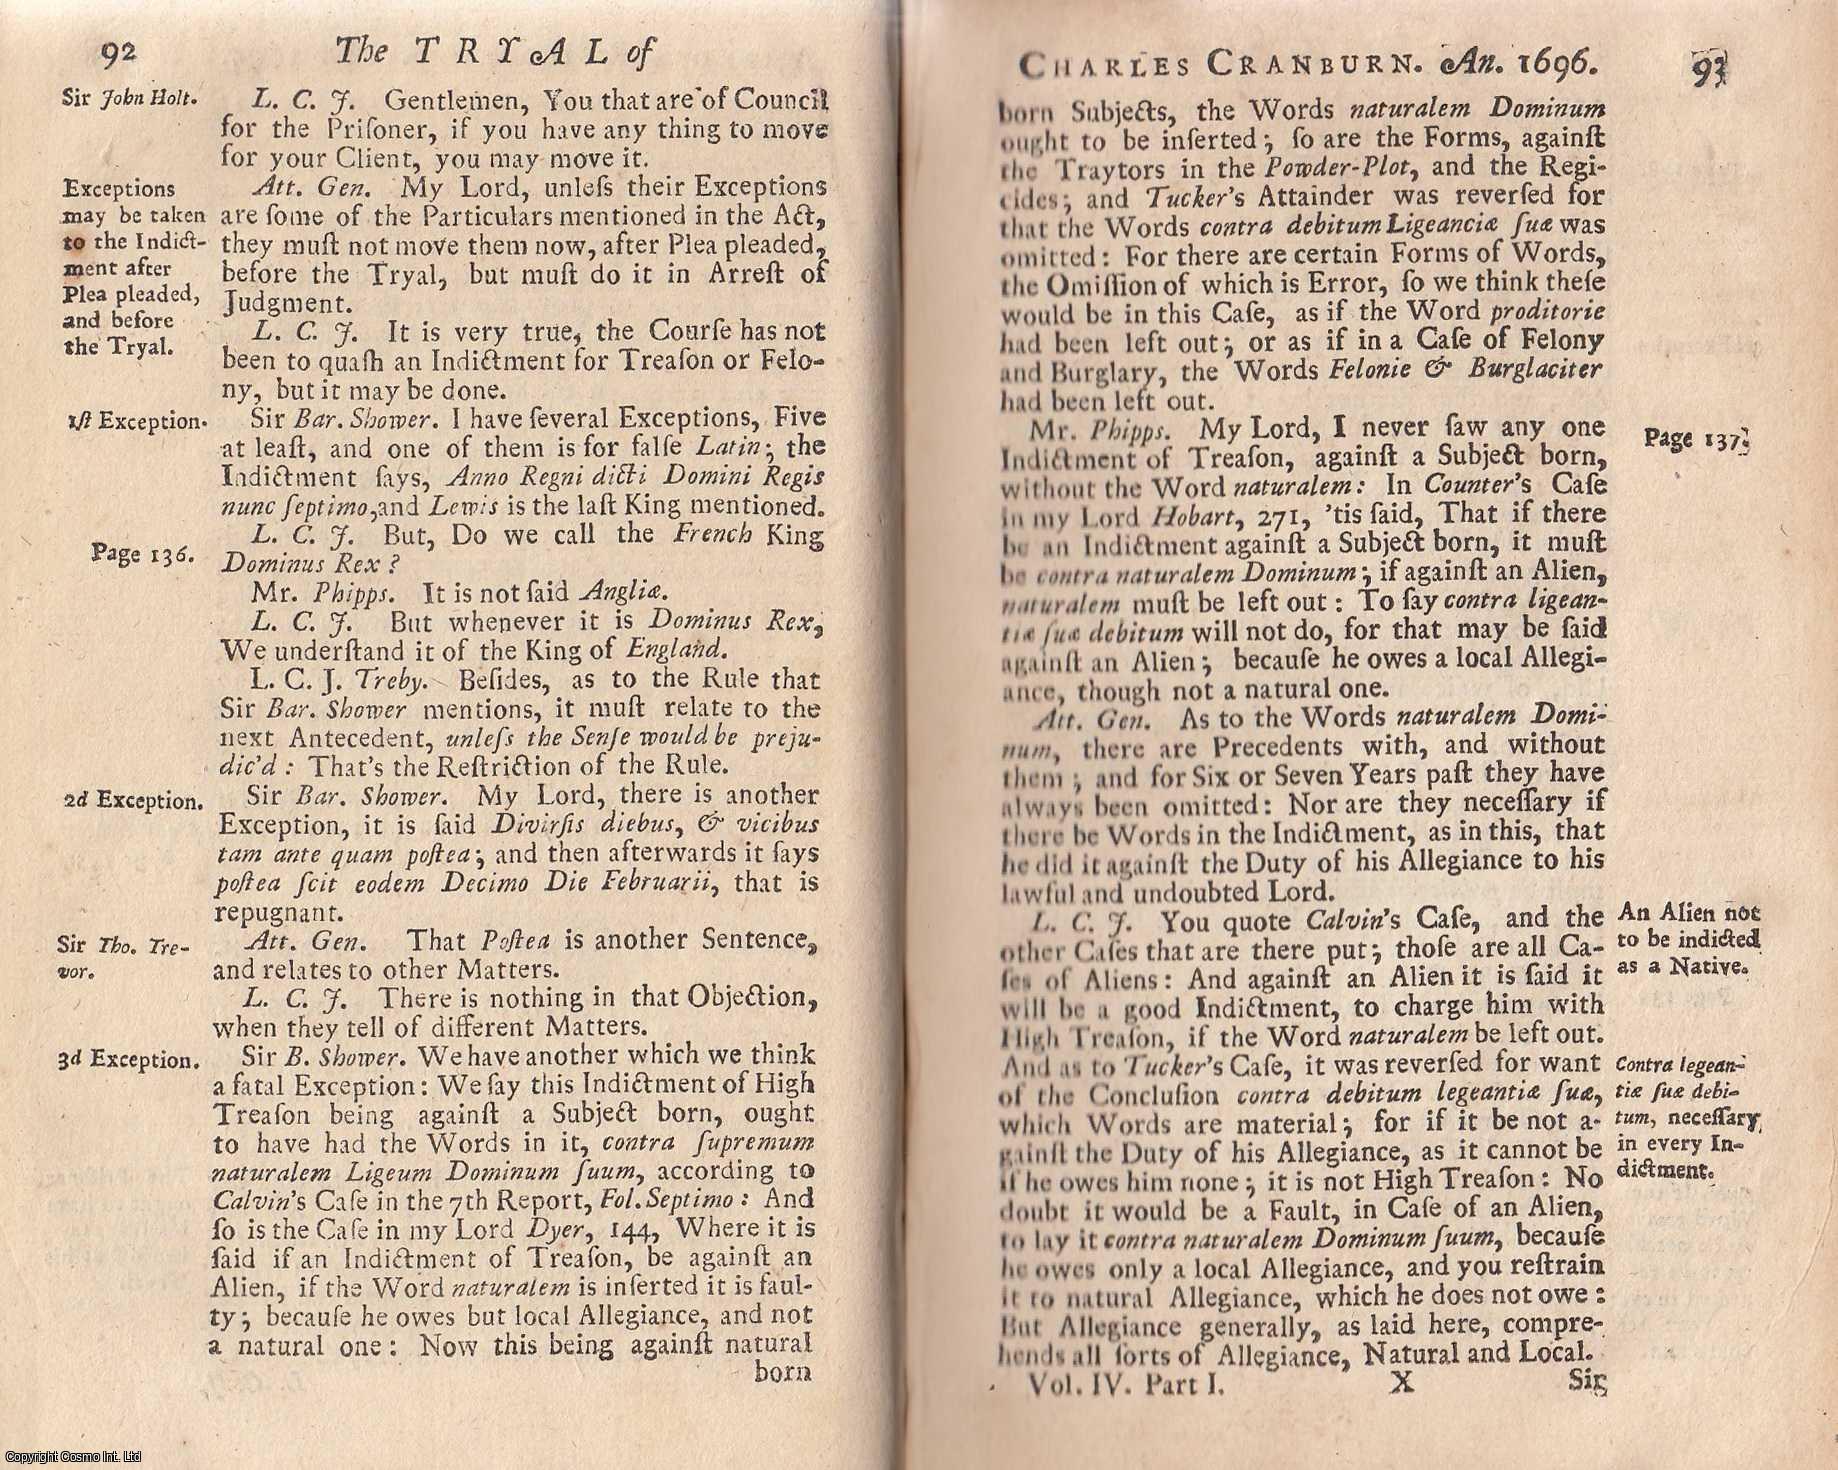 [Trial] - The Trial of Charles Cranburne, for High Treason, April 21, 1696. An original report from the collected Tryals for High Treason, and Other Crimes, 1720.